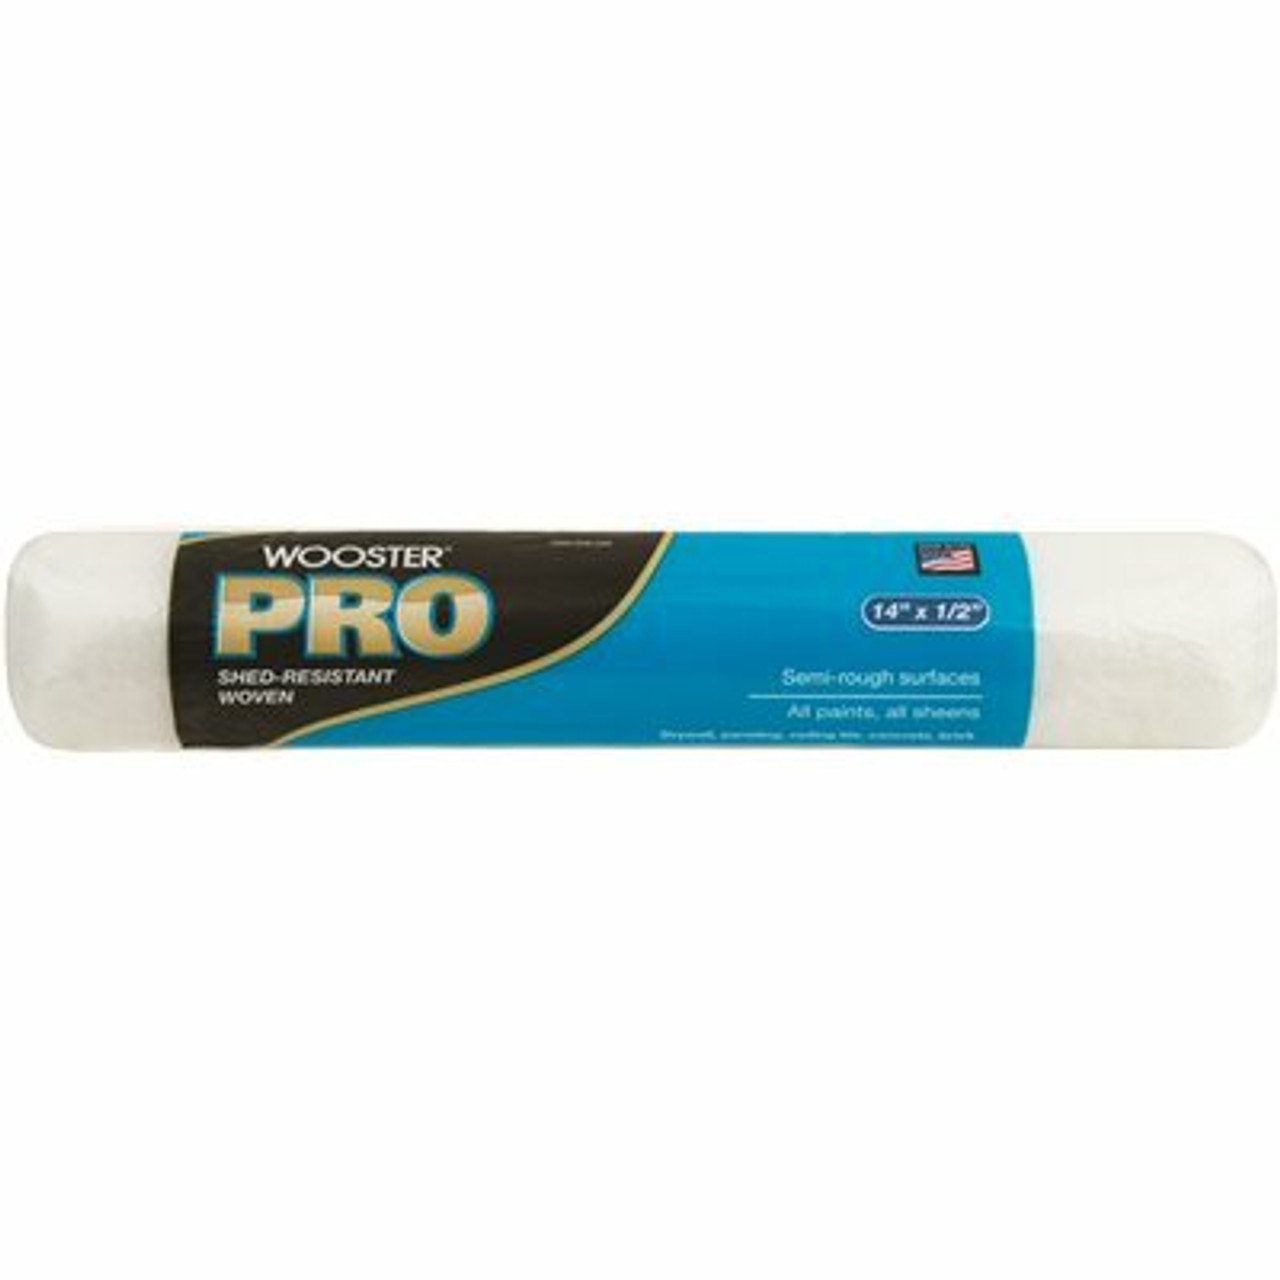 Wooster 14 In. X 1/2 In. High-Density Pro Woven Roller Cover